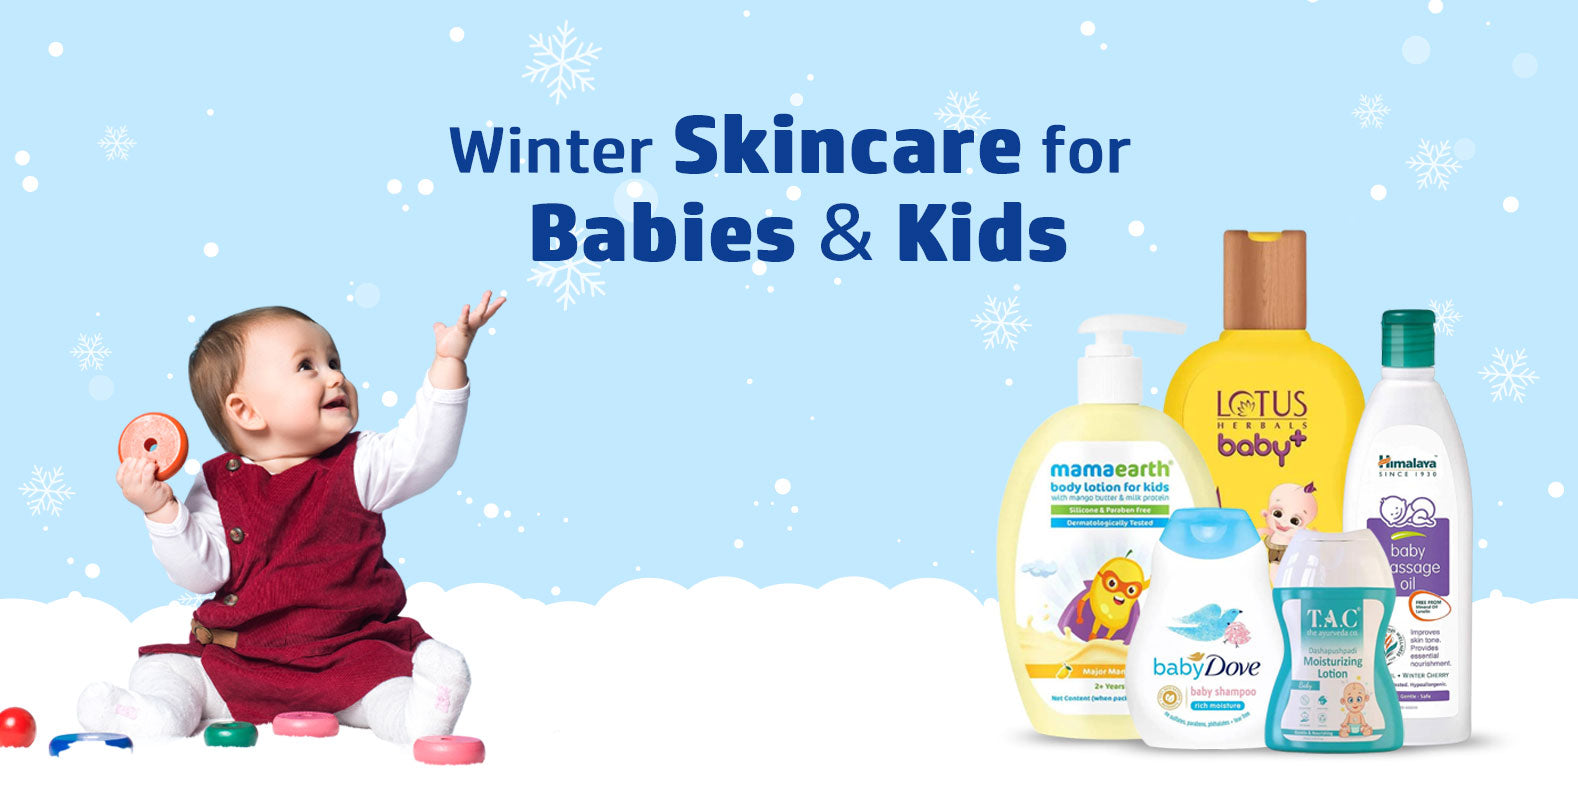 Winter Skin Care During Pregnancy: Moisturizing Right - The Moms Co. Blog